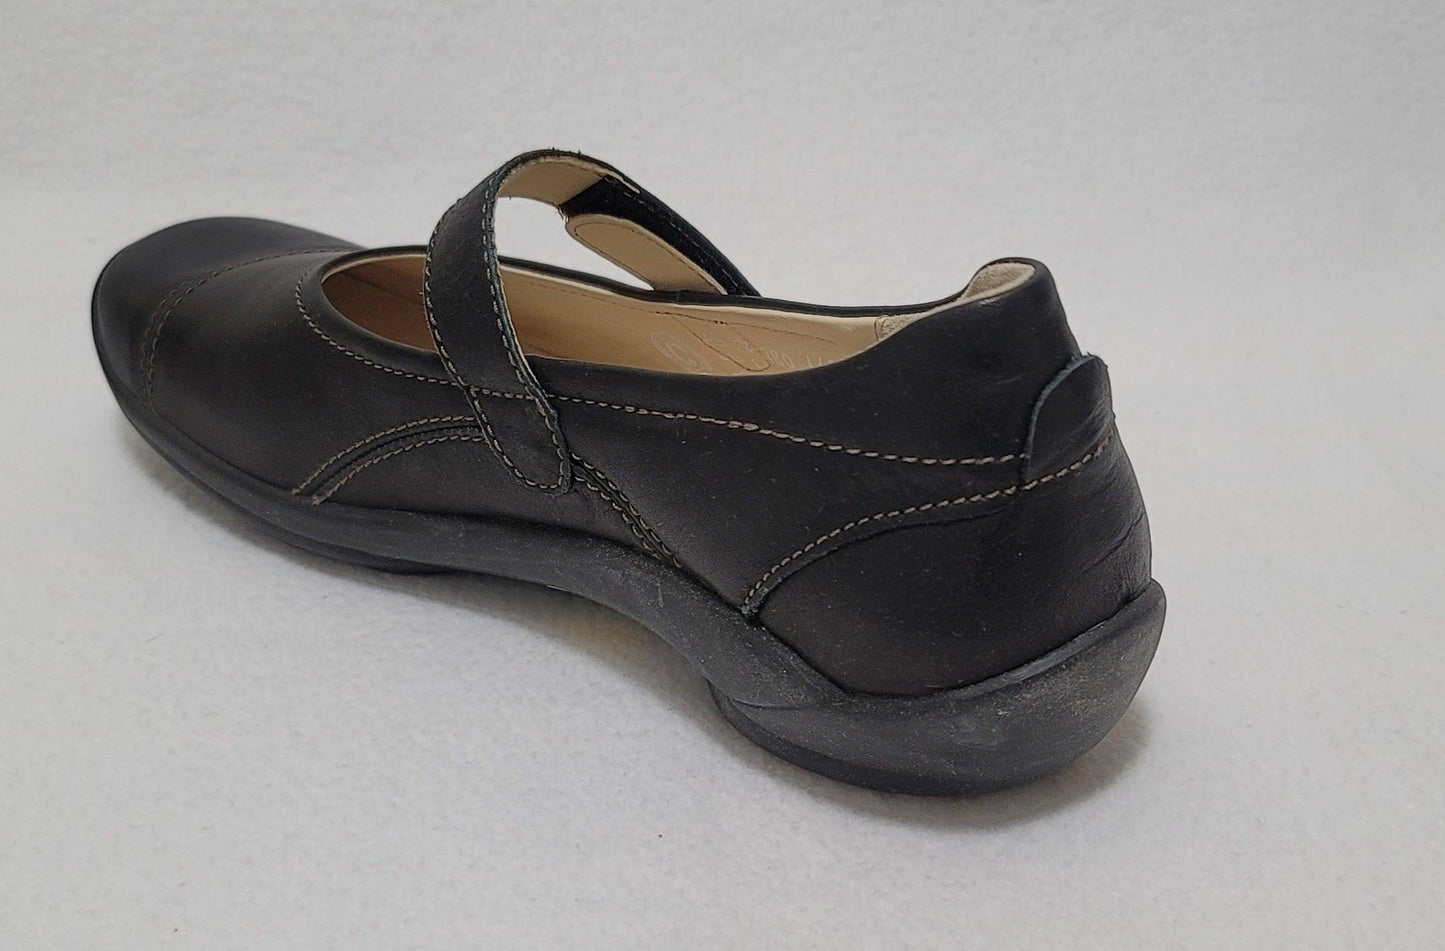 Wolky Evita Mary Jane Leather Comfort Walking Shoes Women's 41 EU / 9.5 US - SVNYFancy